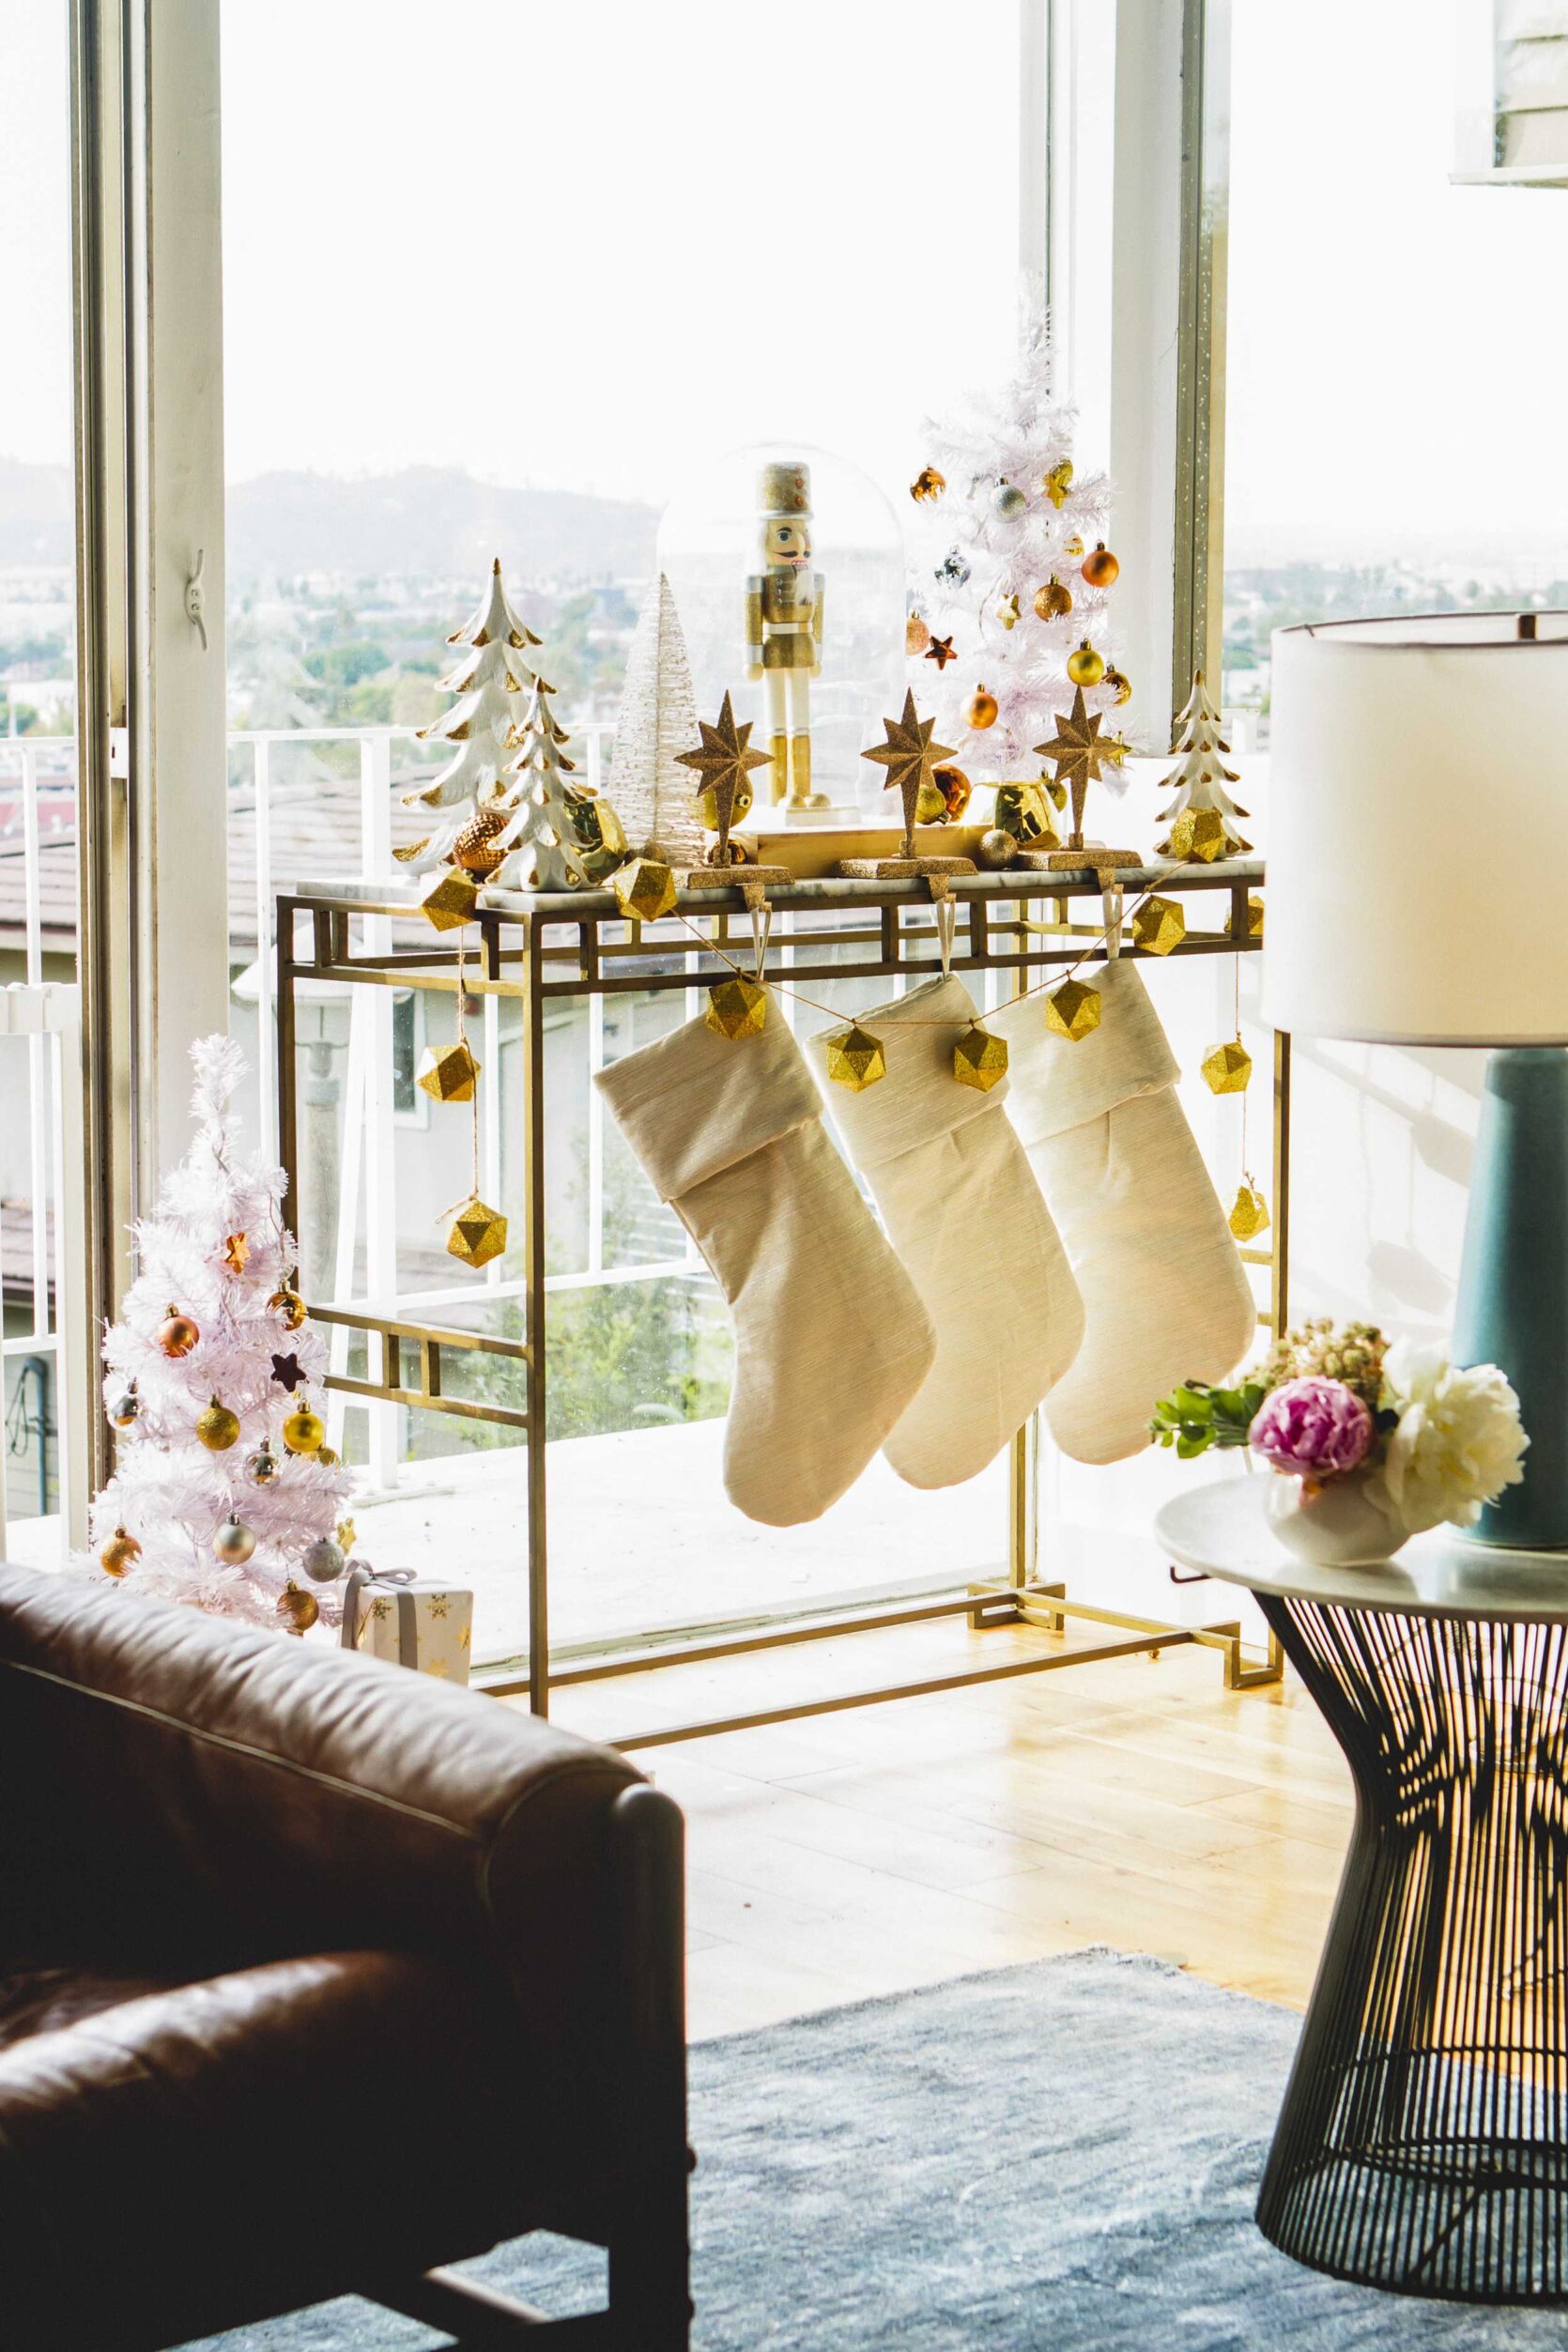 Hanging stockings from mirrors